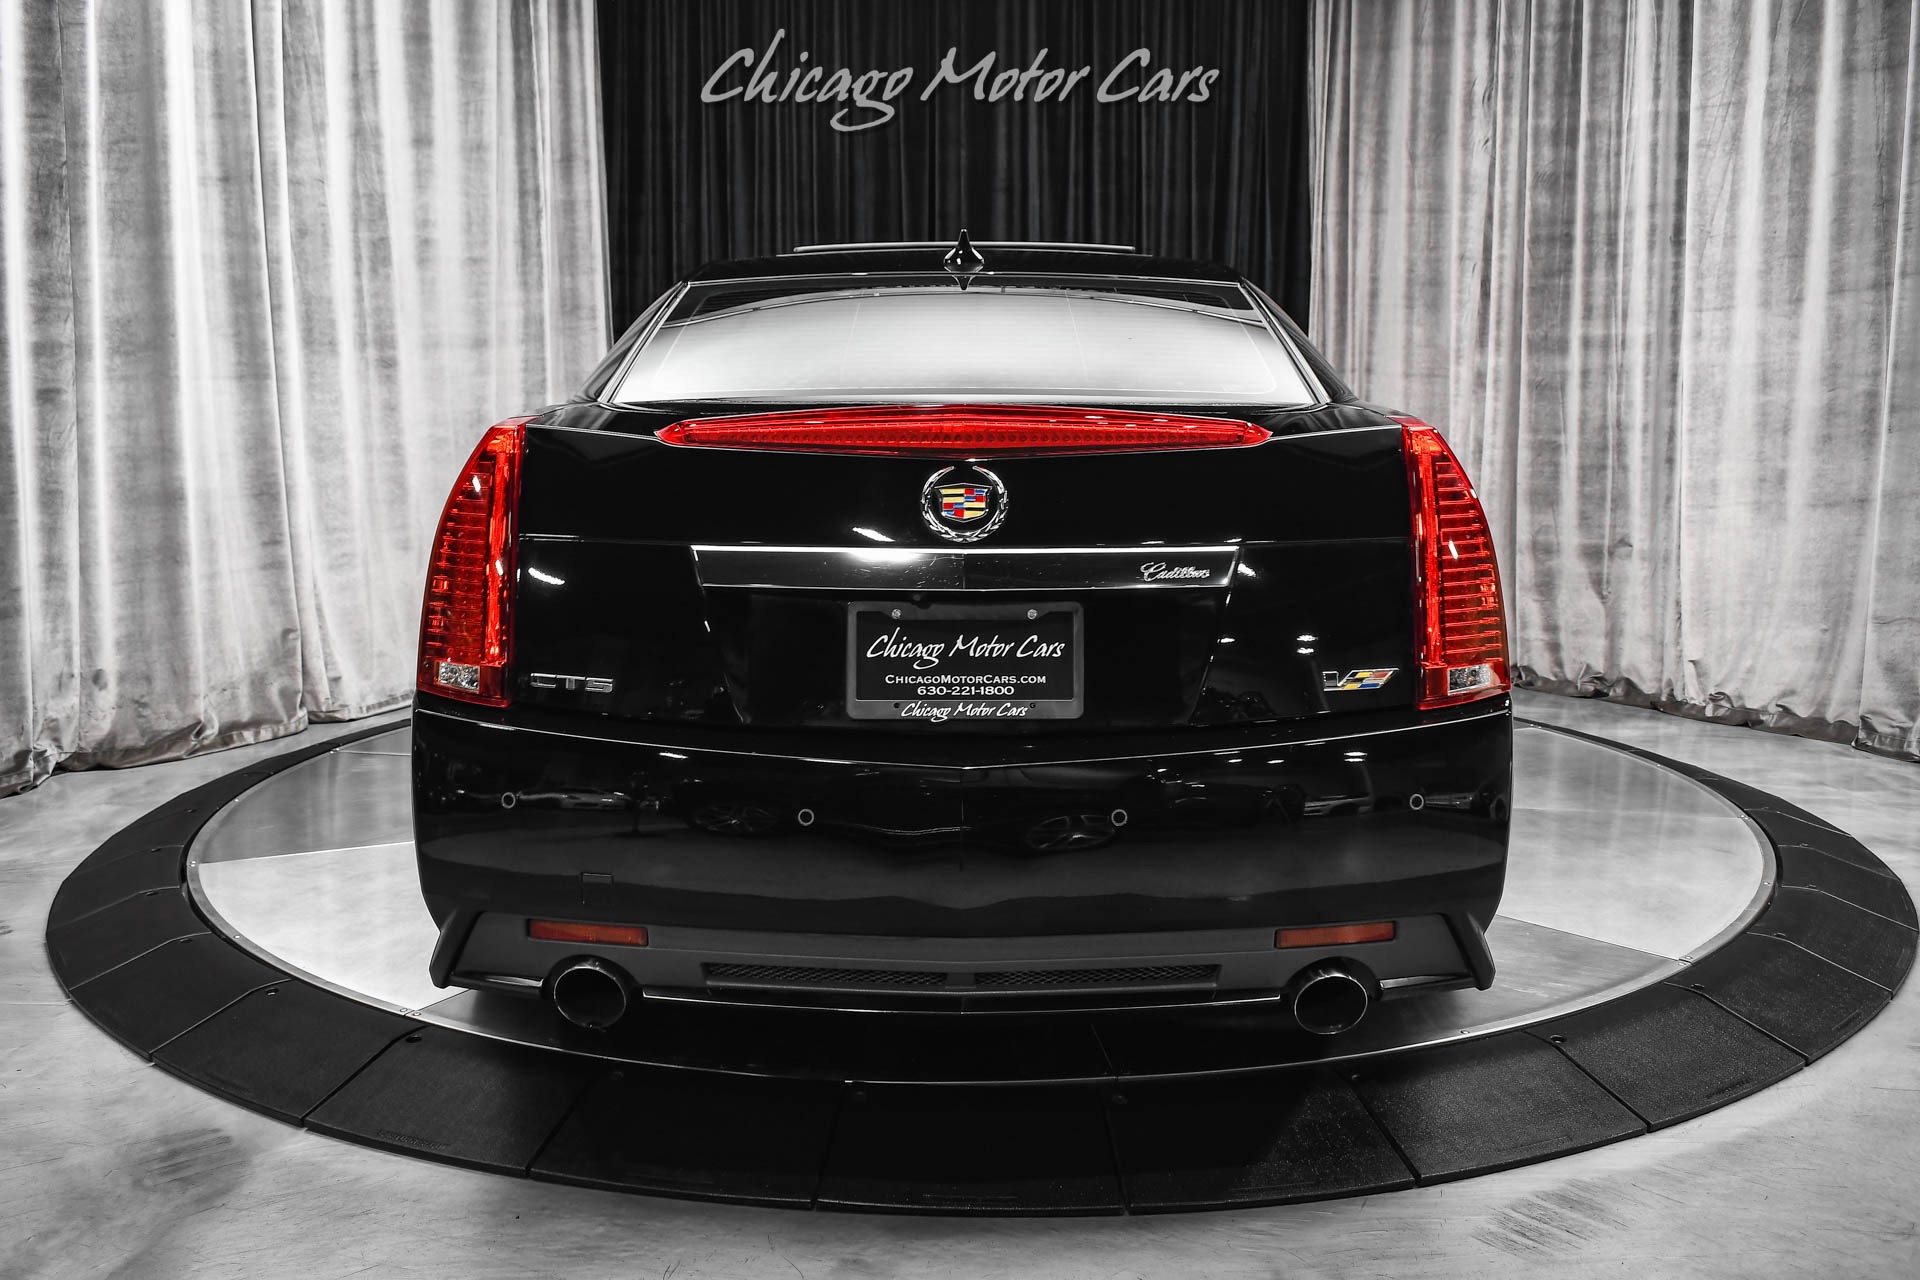 Used-2012-Cadillac-CTS-V-Recaro-Seats-OVER-15K-in-Extras-KW-Coilovers-Kooks-ZL1-Lid